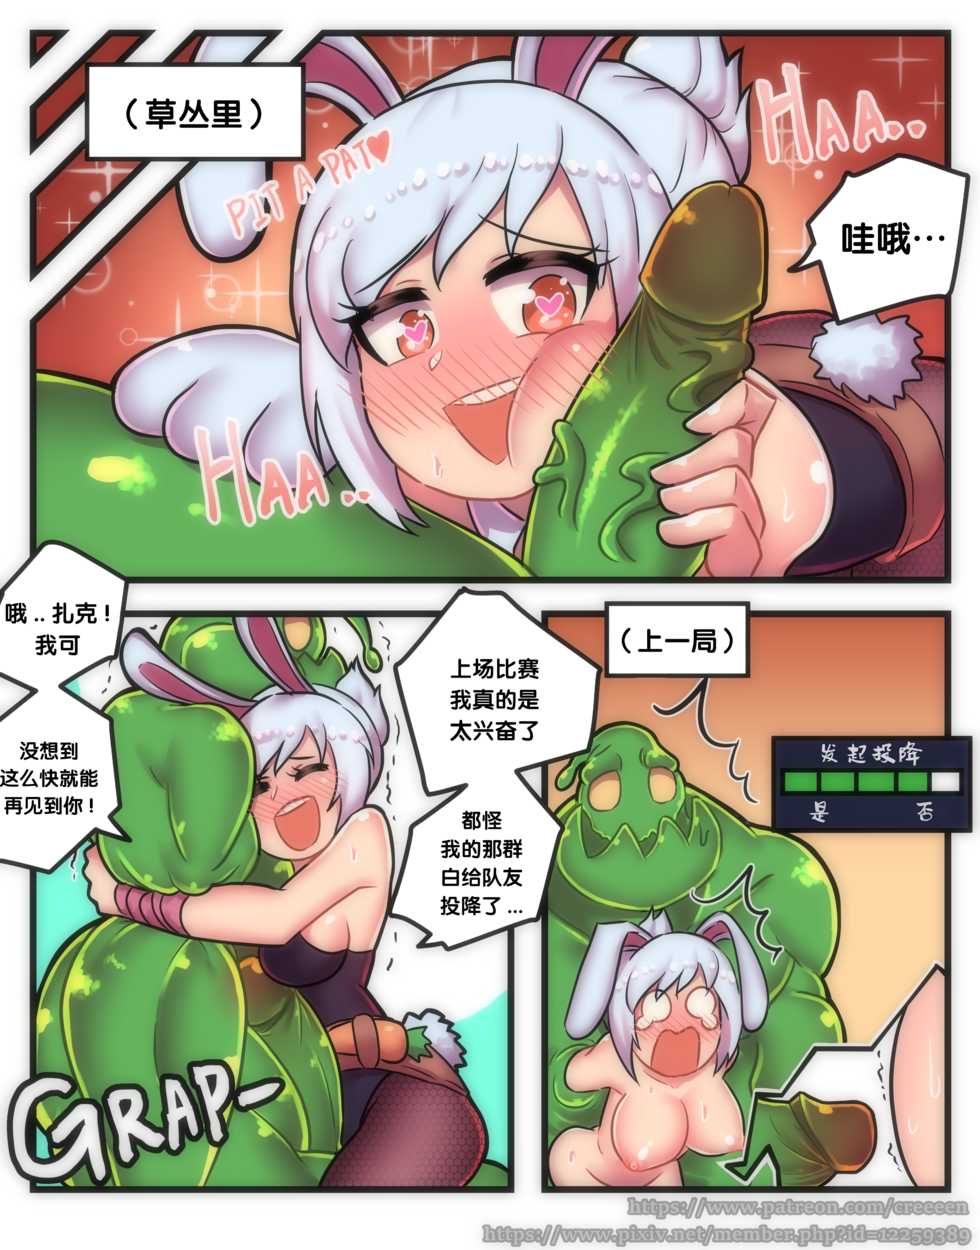 [Creeeen] Rabbit Jelly (League of Legends) [Chinese] [新桥月白日语社] - Page 3